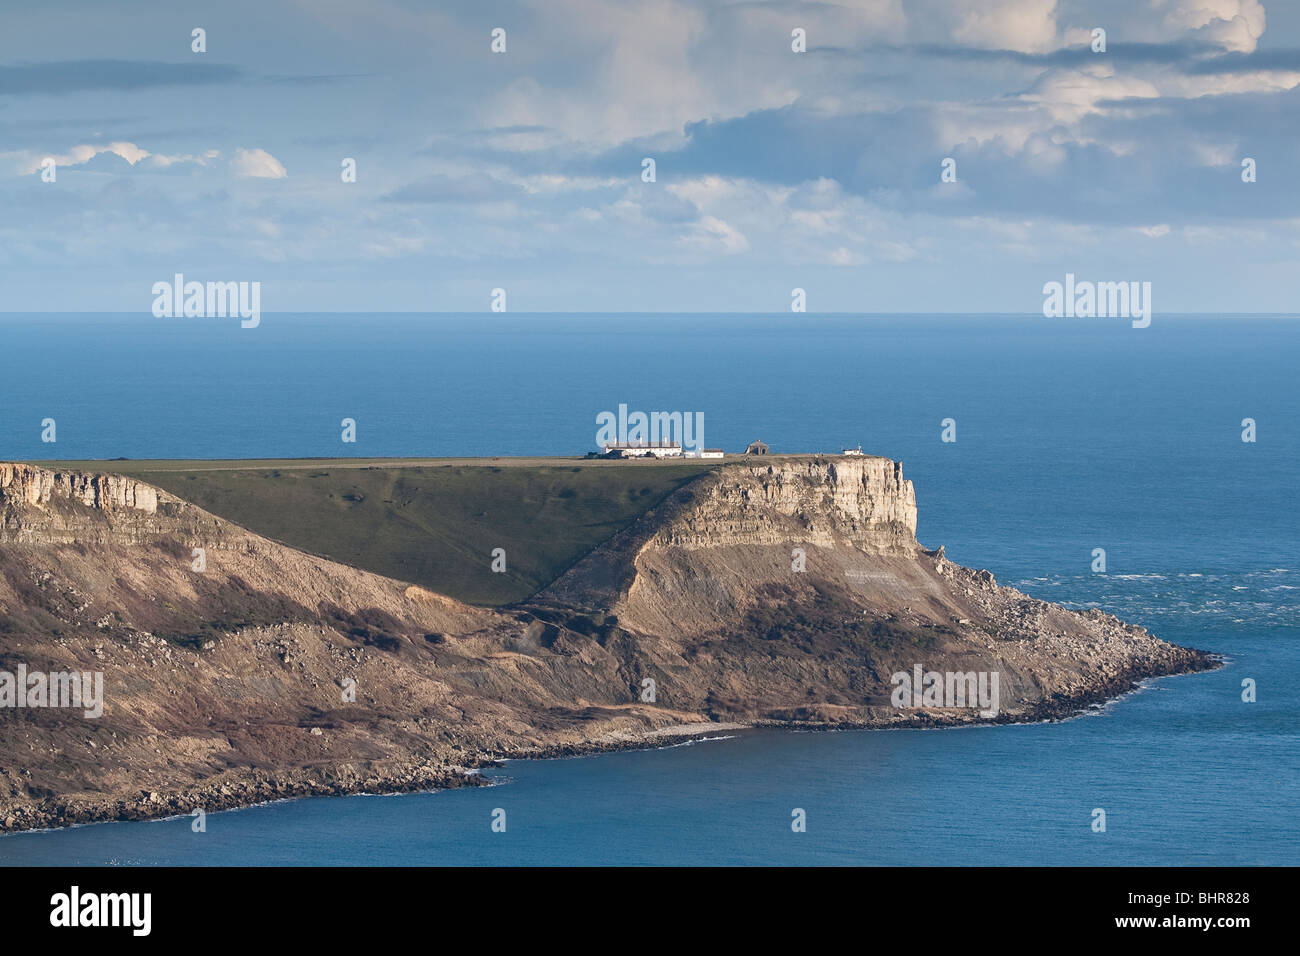 St. Aldhelm's Head in the Isle of Purbeck, Dorset, UK Stock Photo